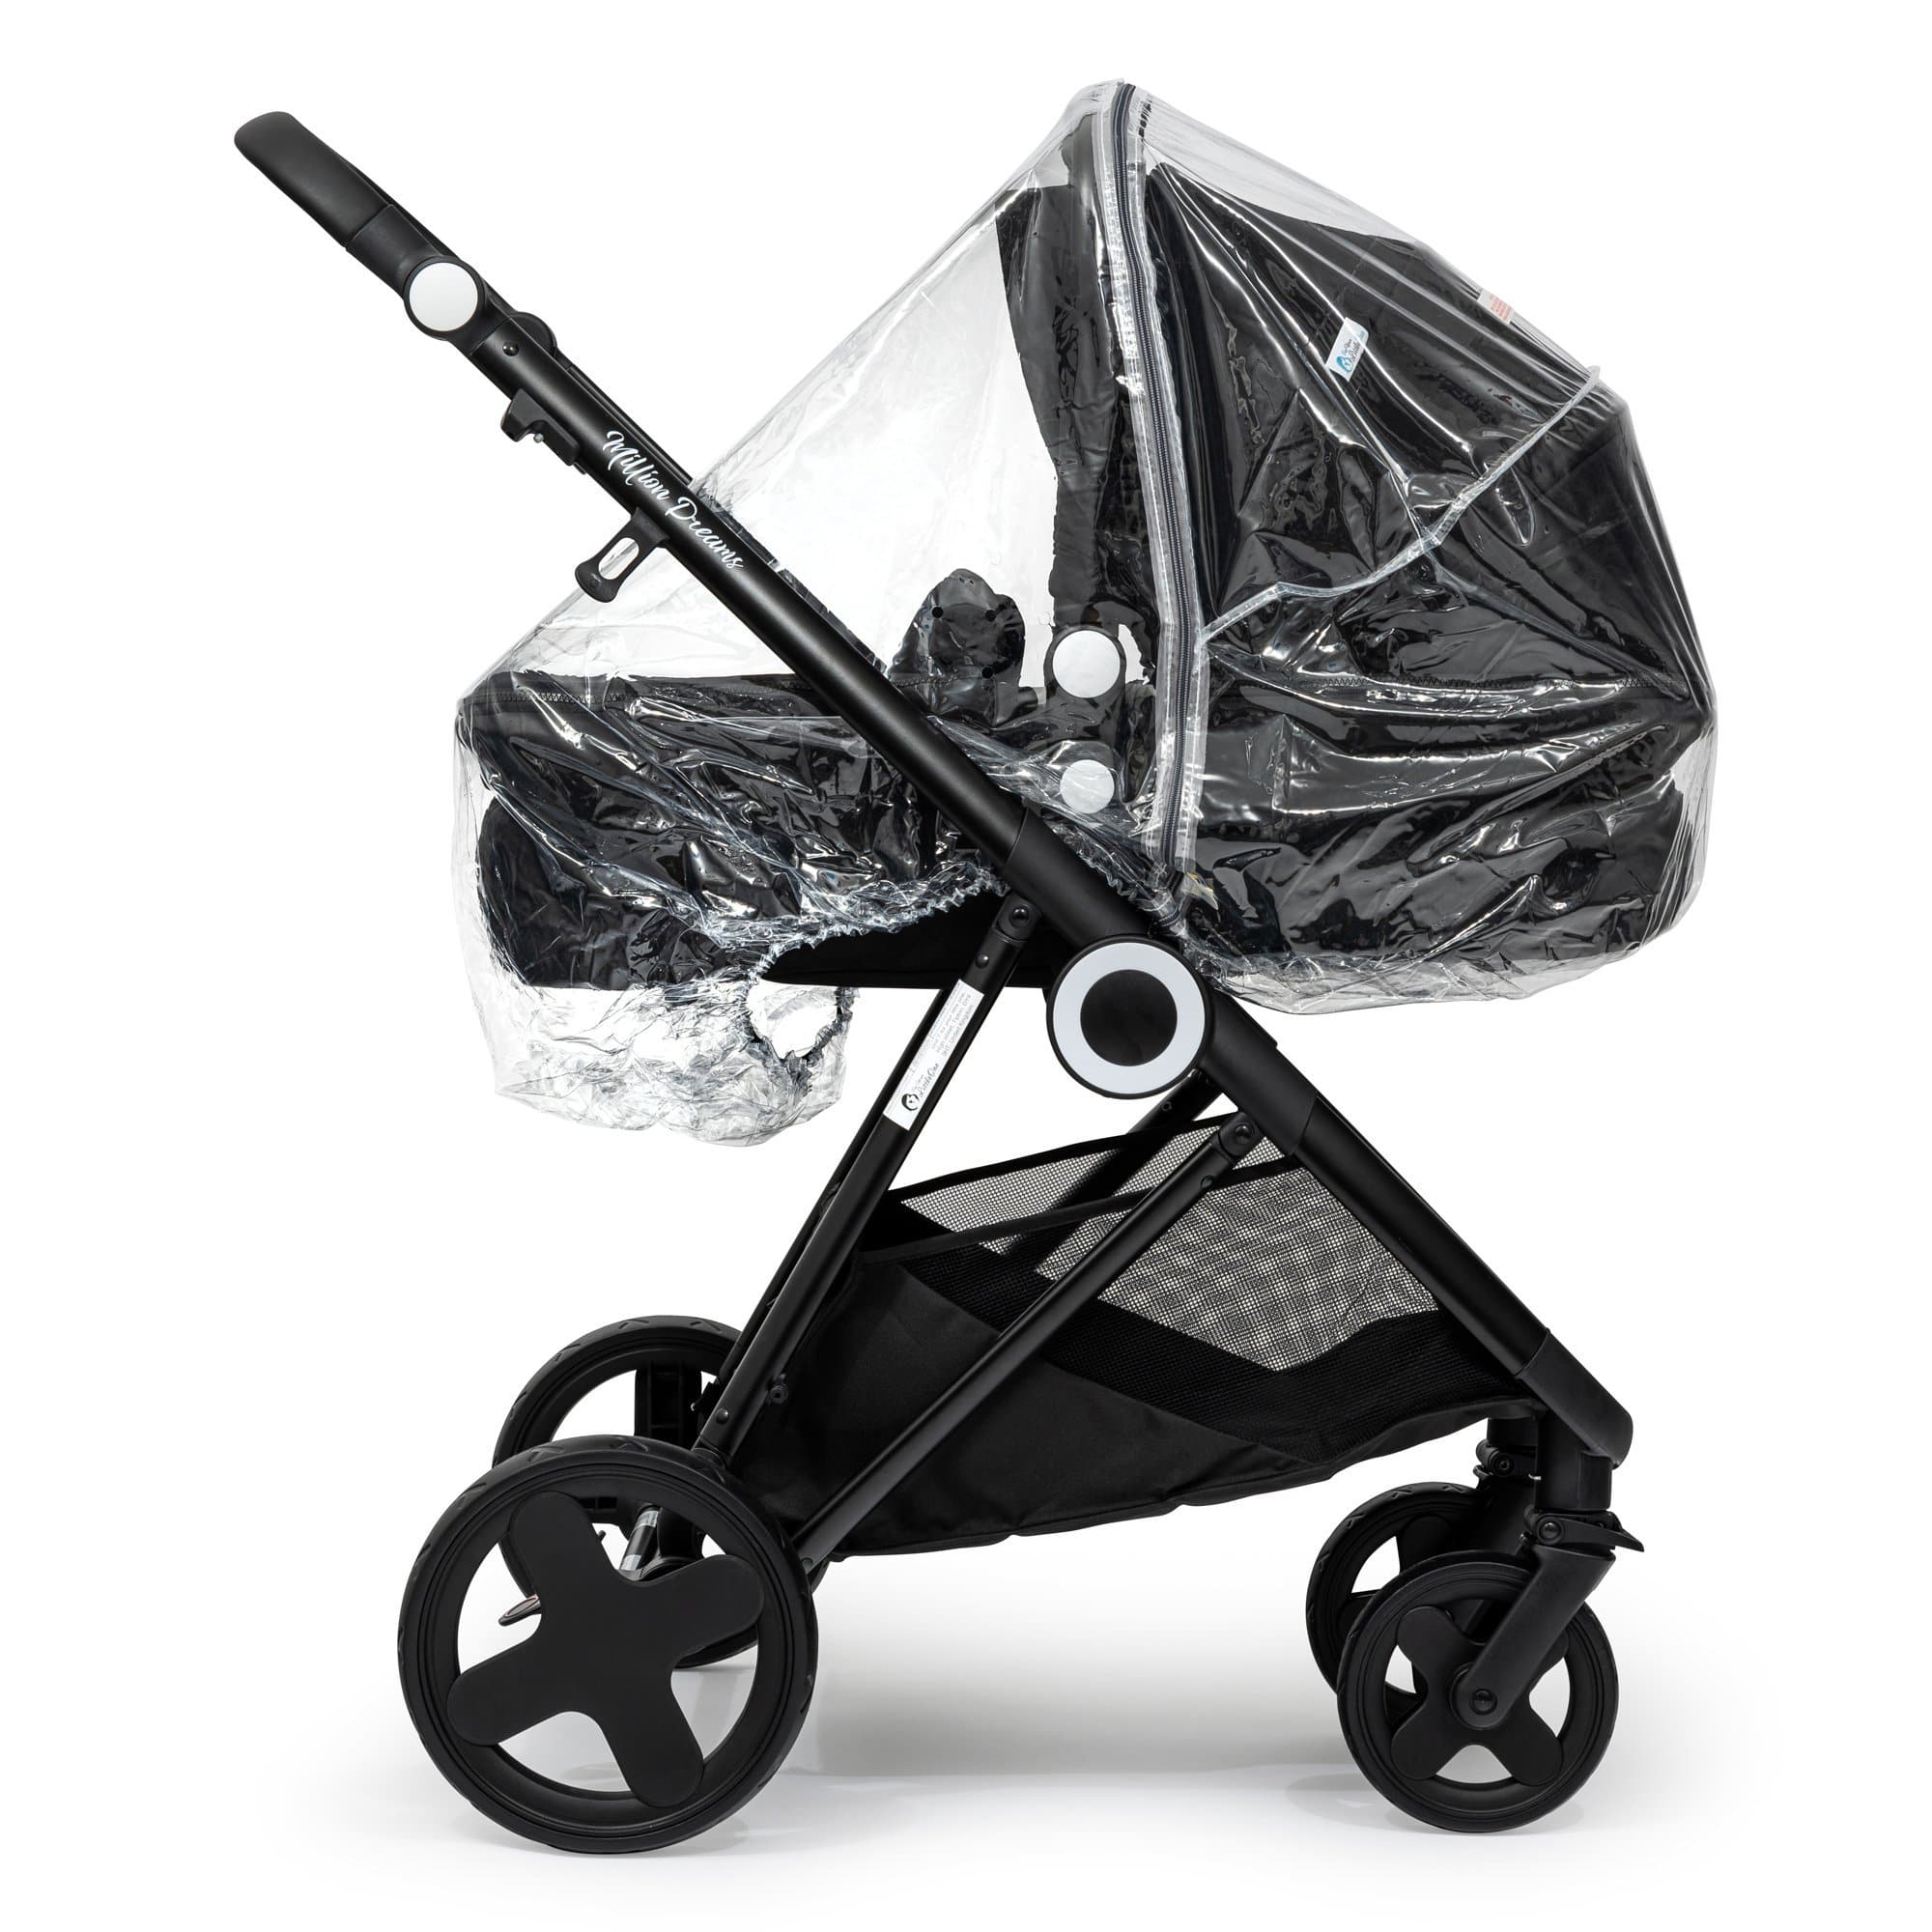 2 in 1 Rain Cover Compatible with Red Kite - Fits All Models -  | For Your Little One